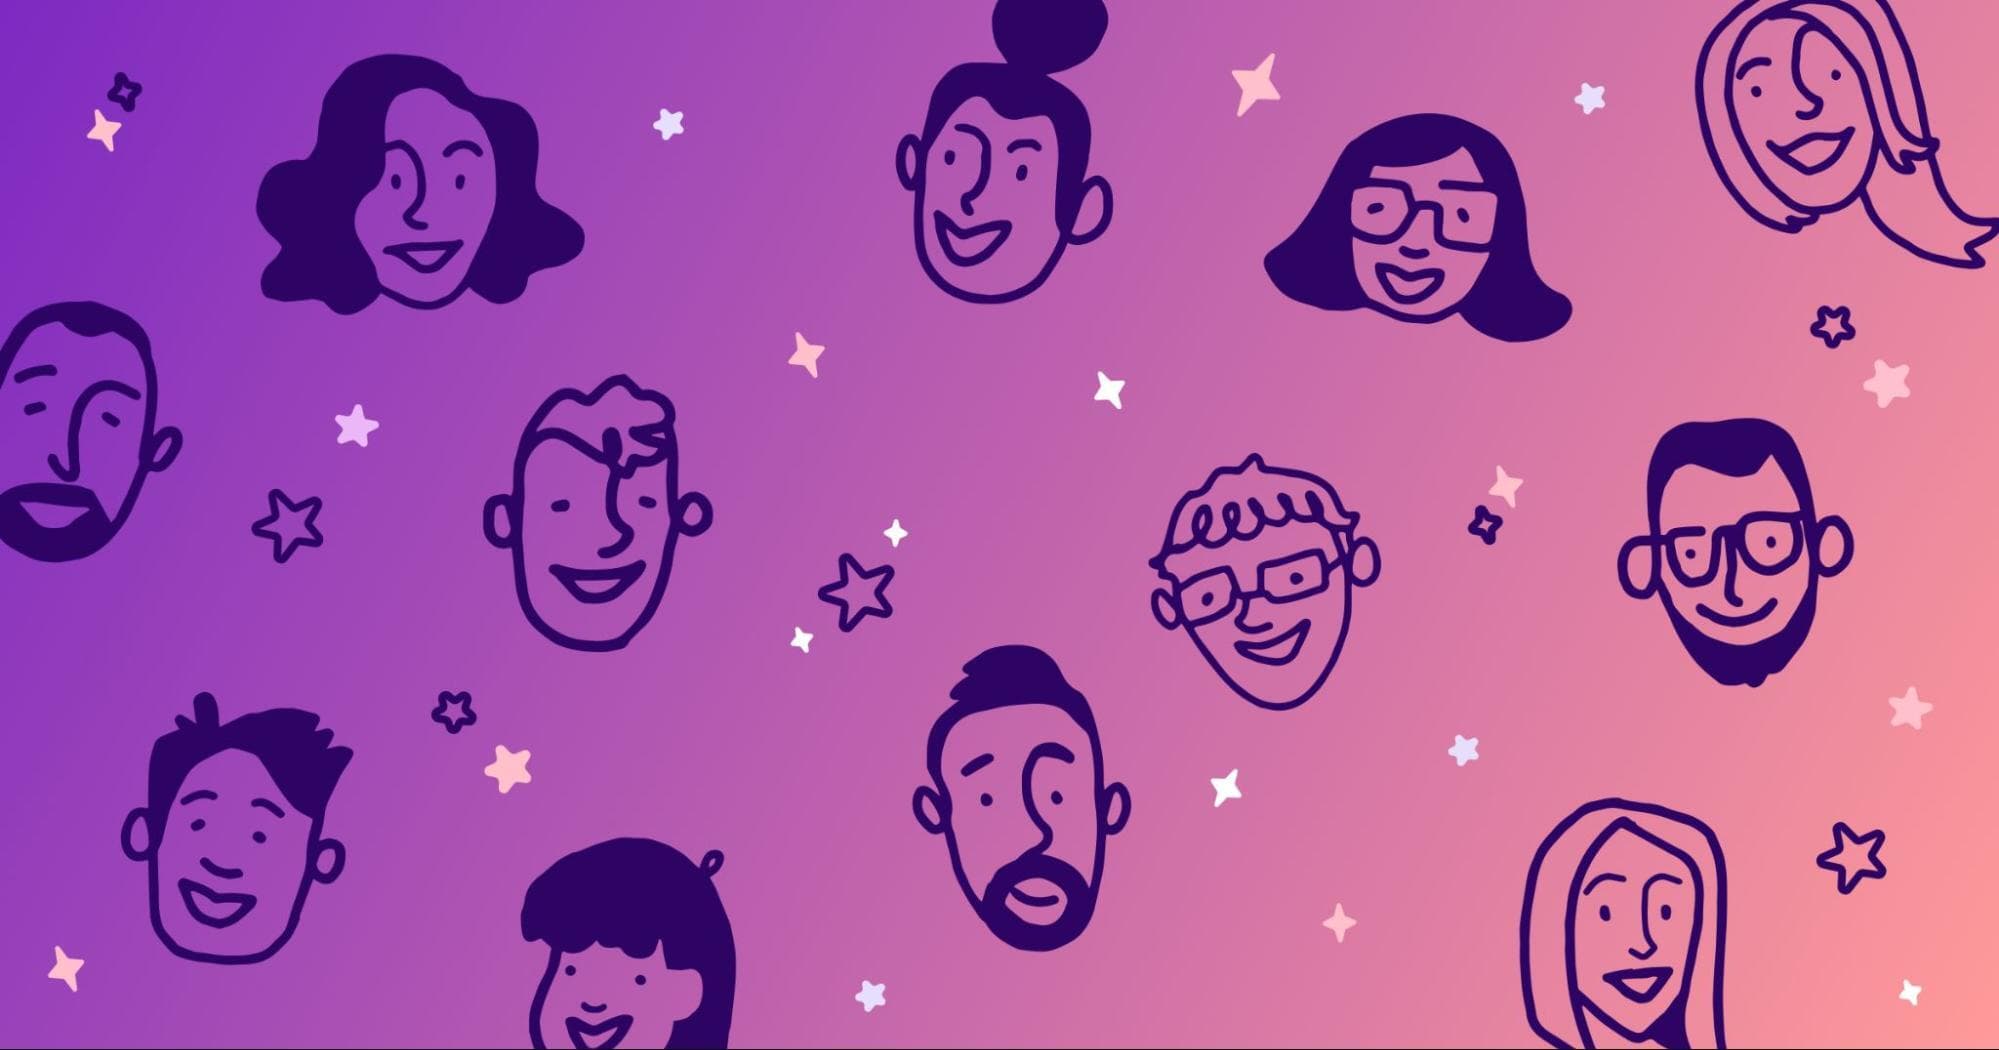 Illustrations of human faces on purple and pink background.